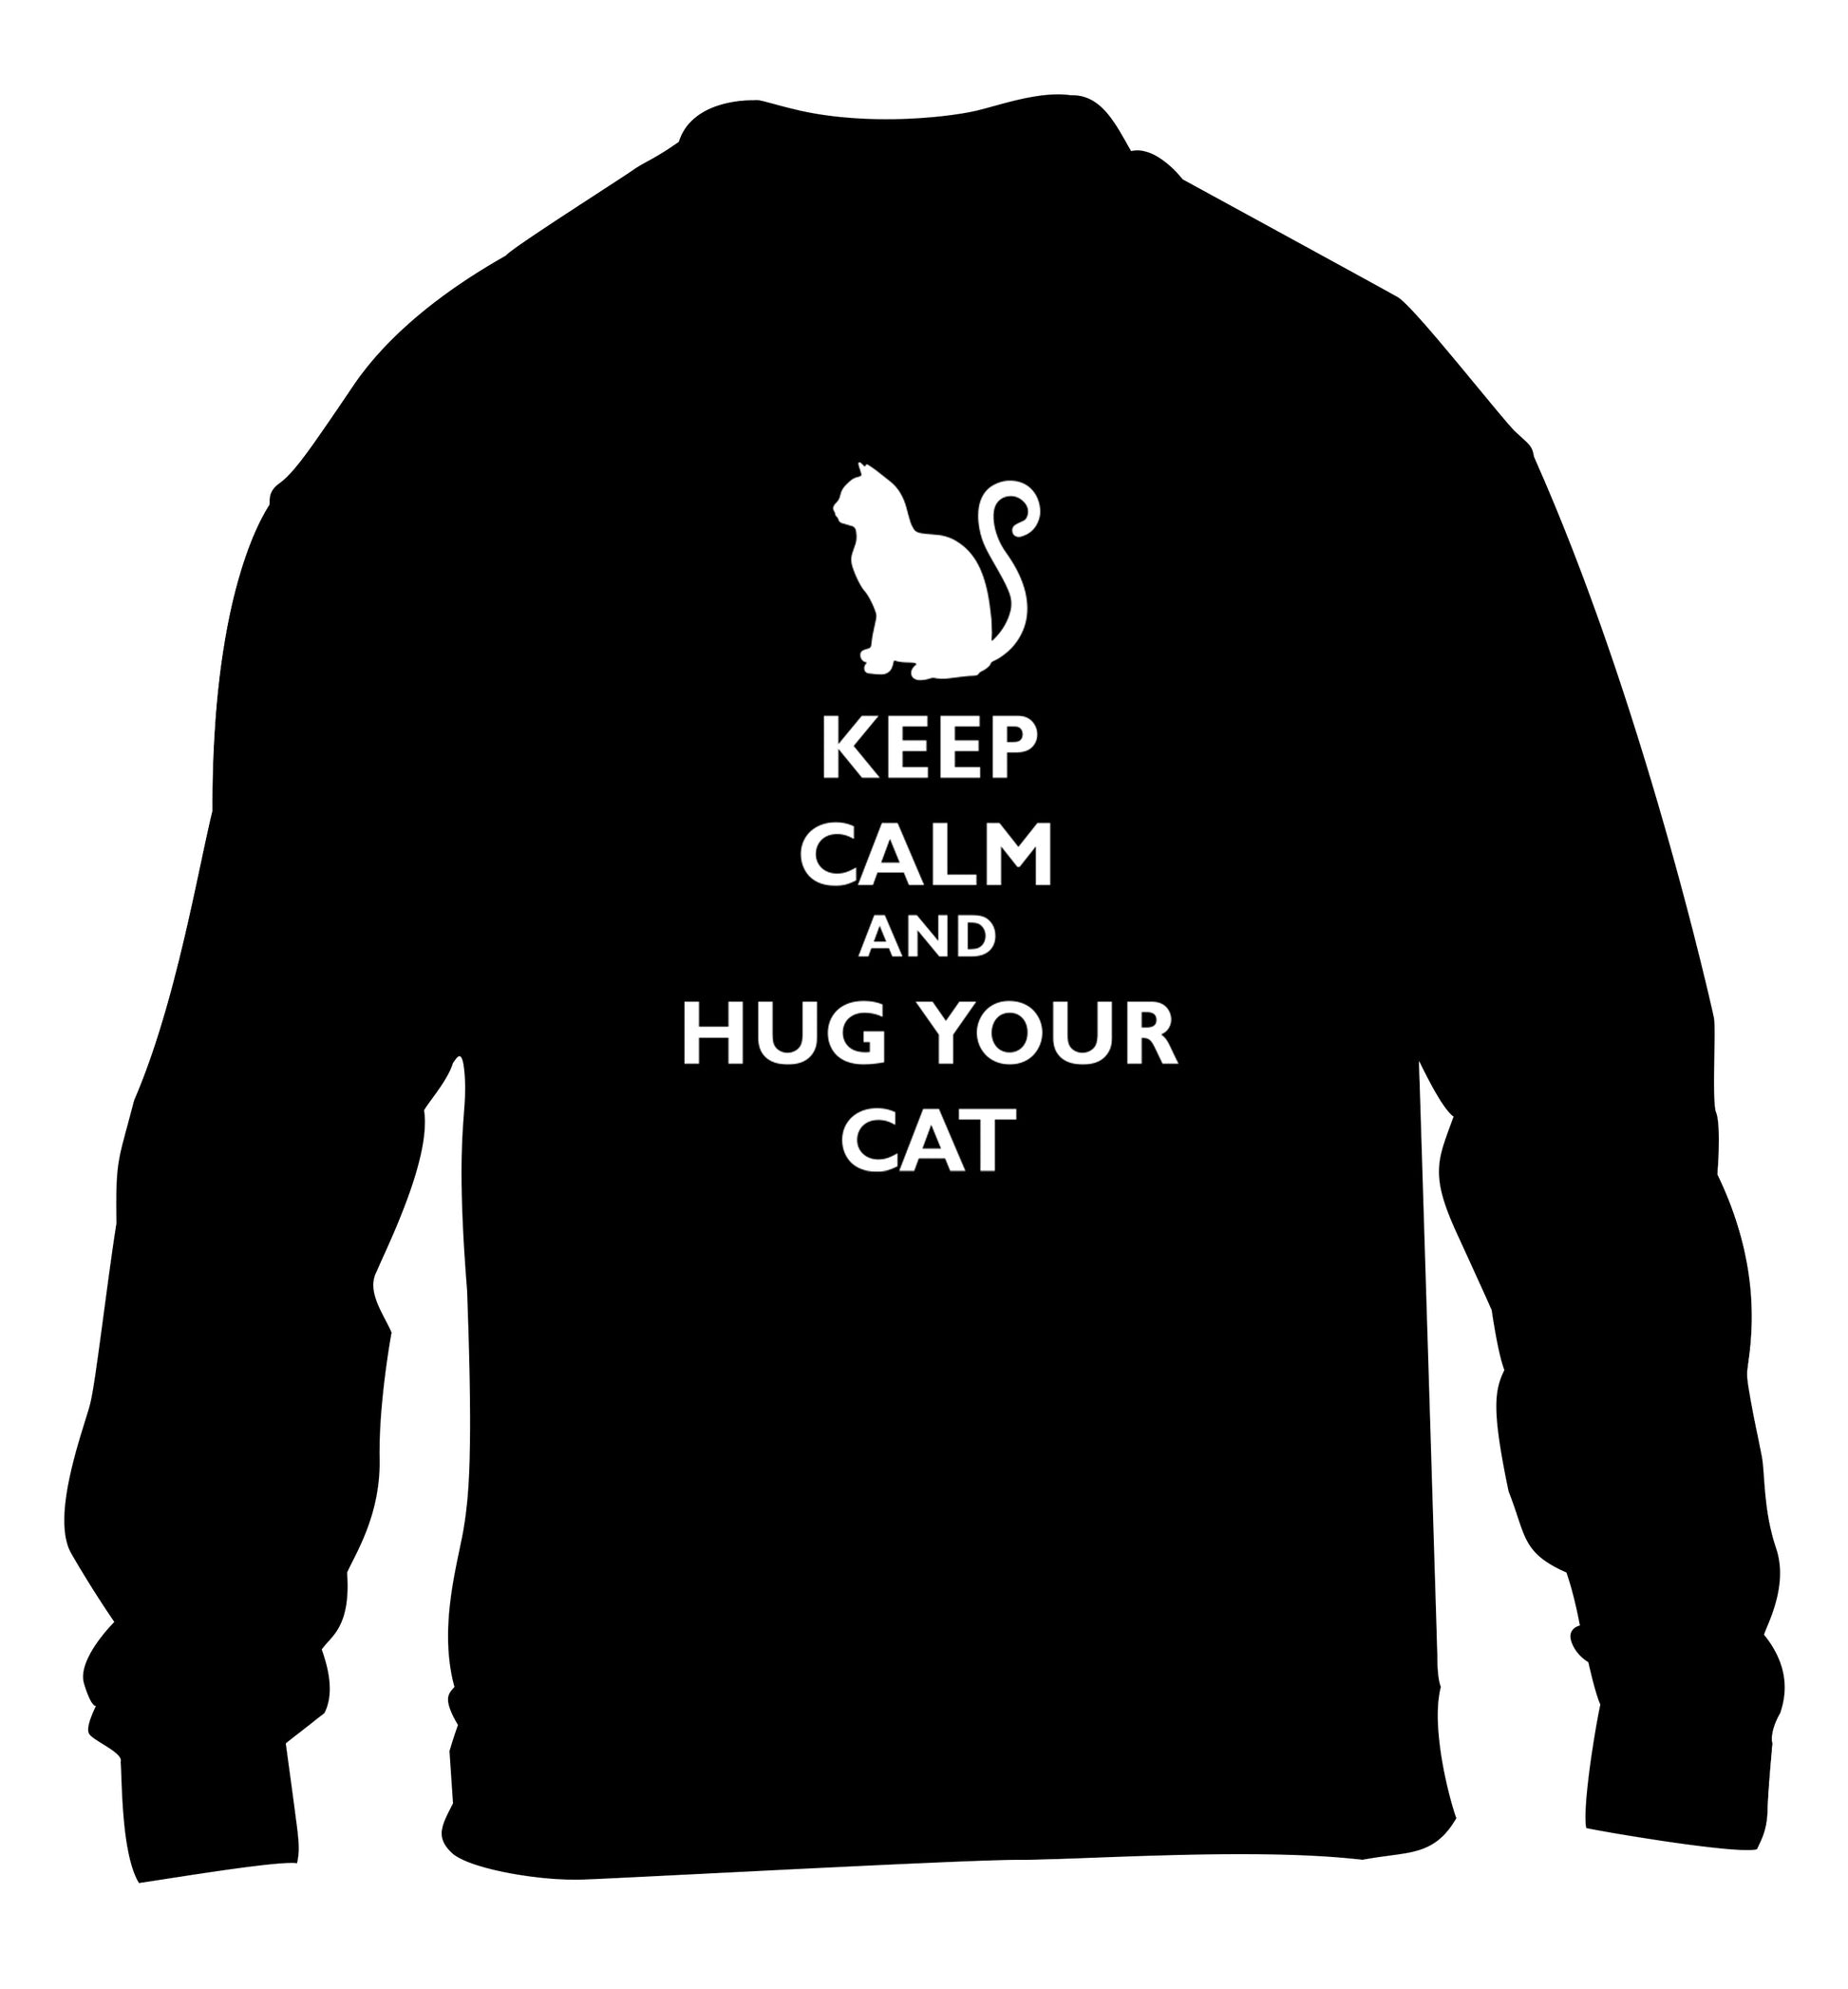 Keep calm and hug your cat children's black sweater 12-13 Years